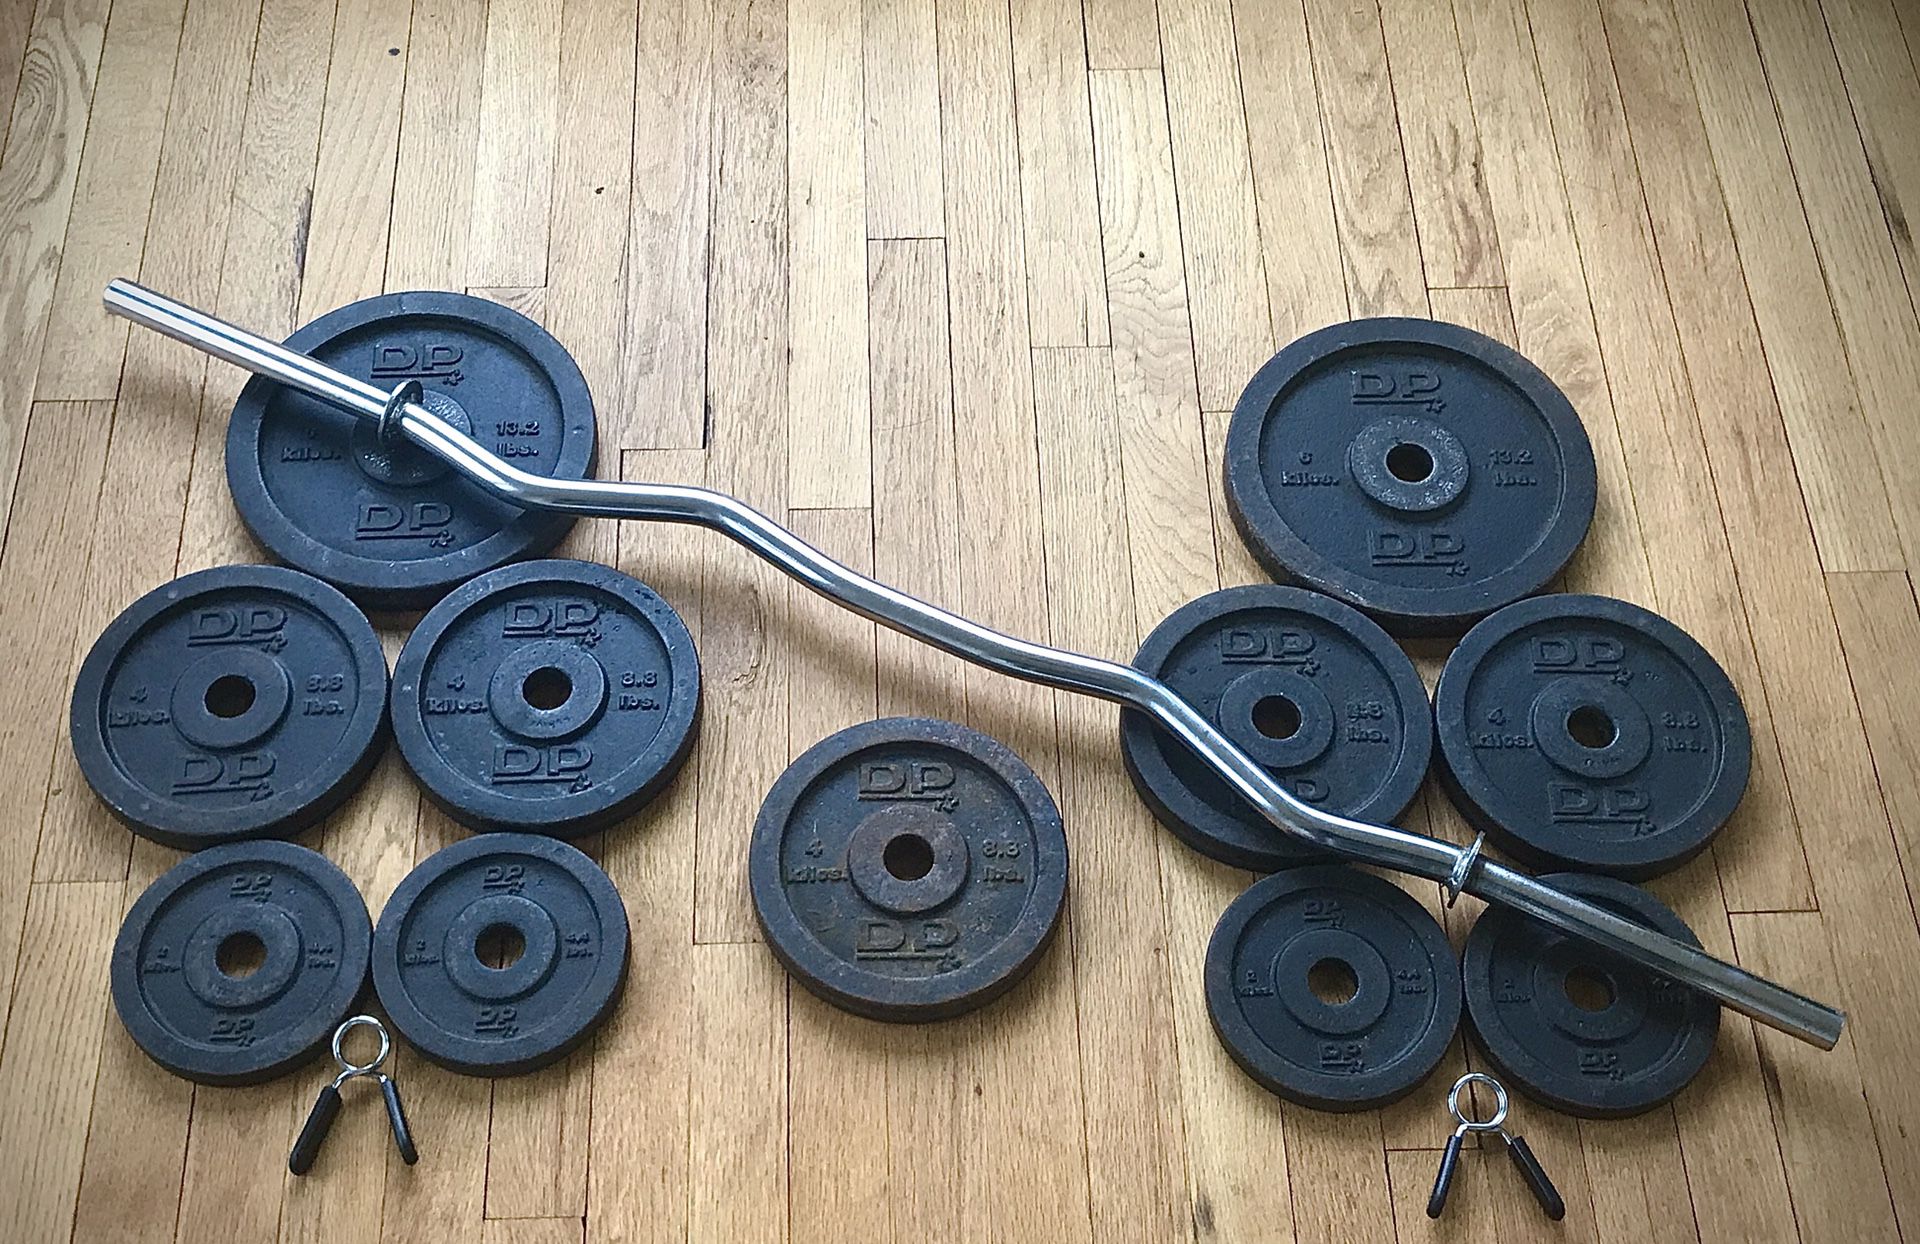 Standard Curling Bar Rare ‘DP’ Weight Lifting Set of Total 40kg / 88lb plates w/ clips